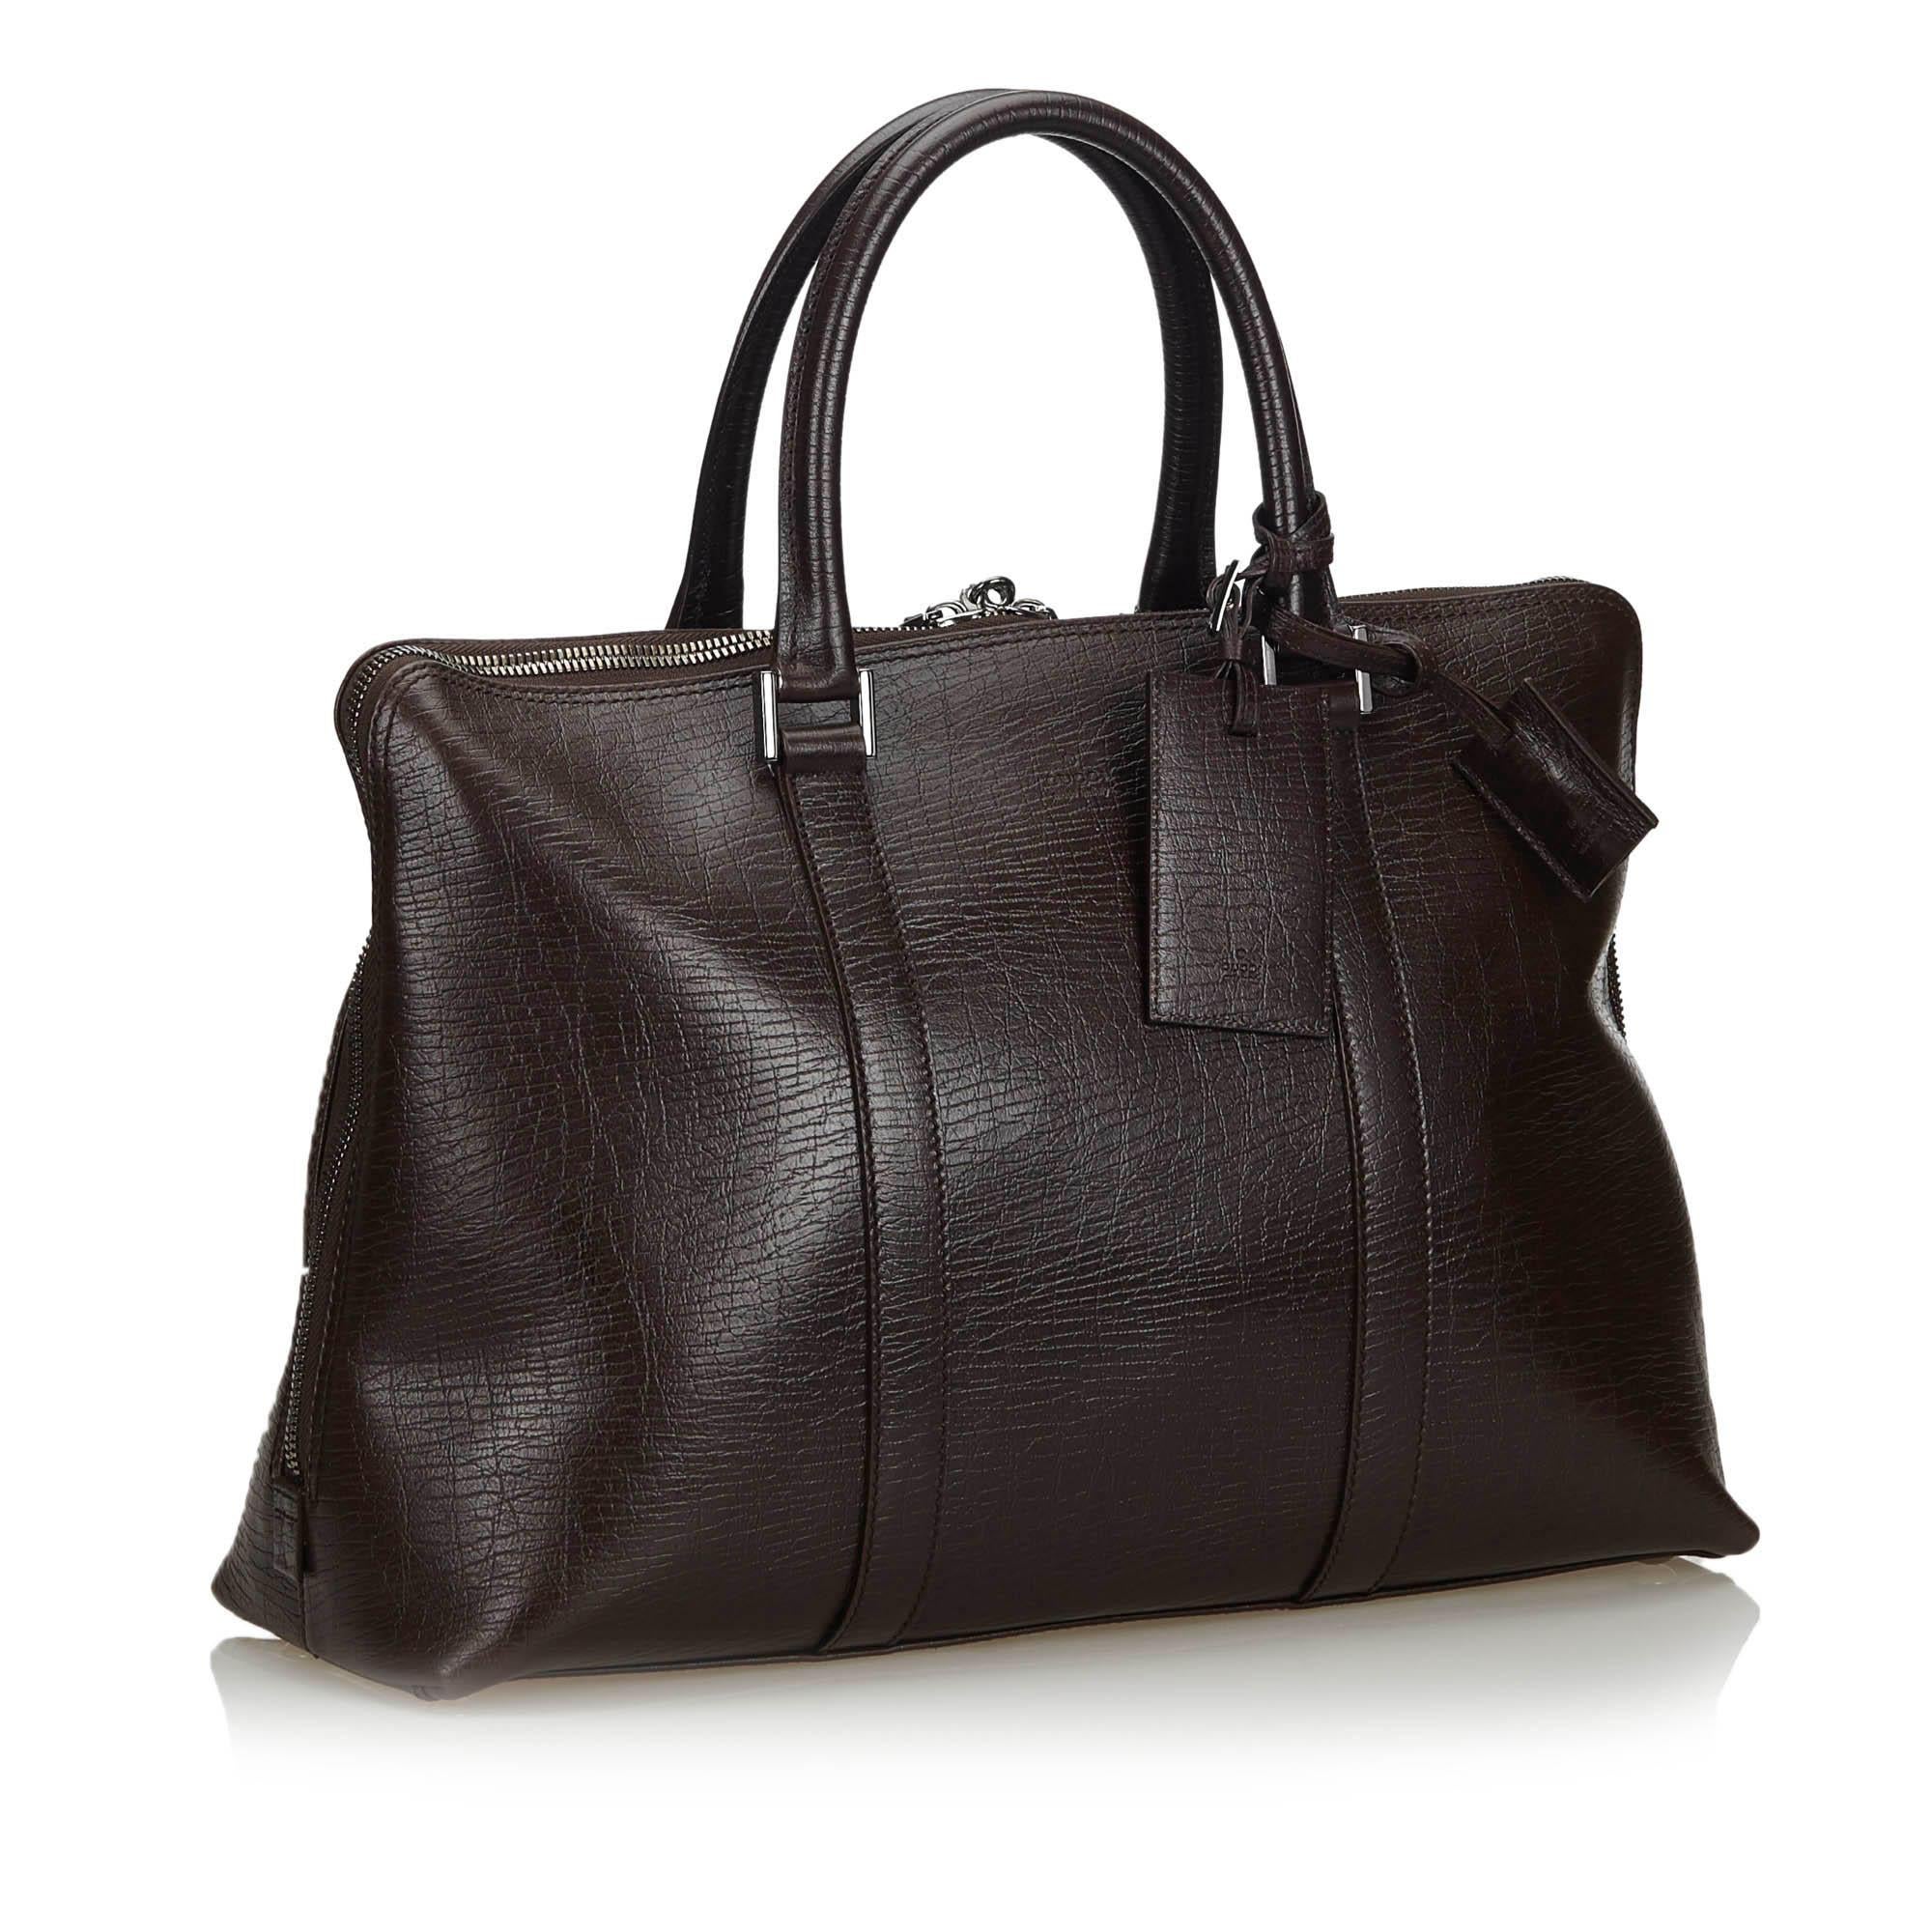 This business bag features a leather body, rolled leather handles, a luggage tag, a zip around closure, and interior zip and slip pockets. It carries as AB condition rating.

Inclusions: 
Padlock

Dimensions:
Length: 29.00 cm
Width: 45.00 cm
Depth: